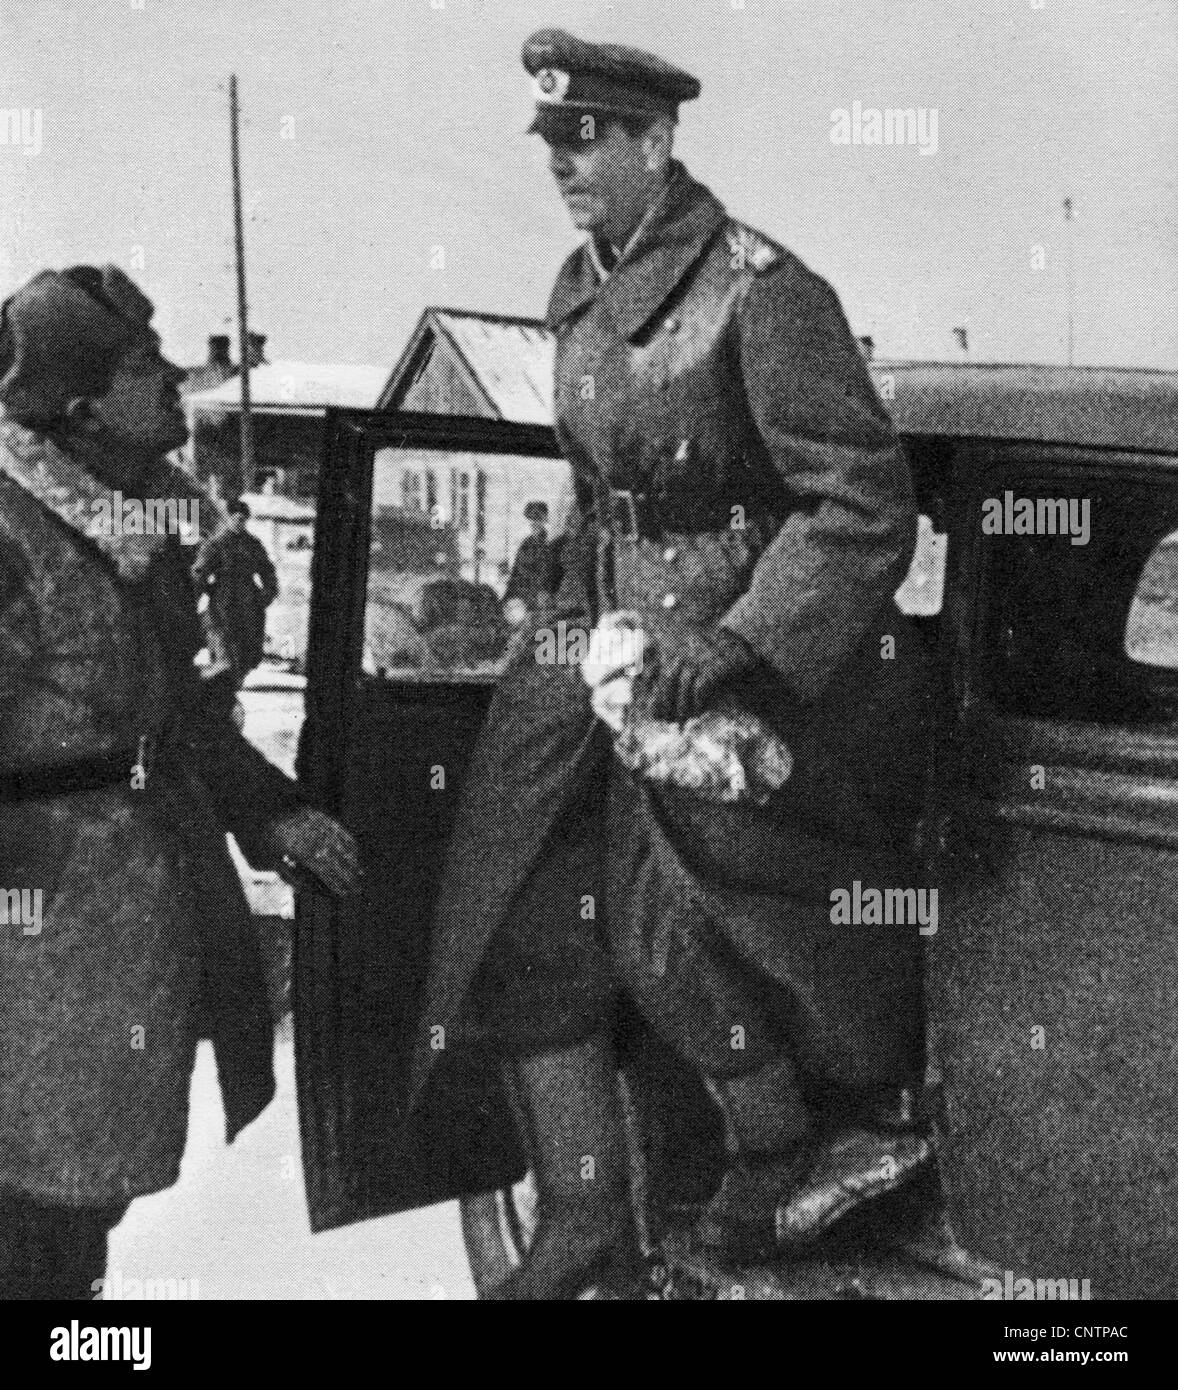 FIELD MARSHALL FRIEDRICH PAULUS (1890-1957) arriving at Russian HQ on 31 January 1943 after Battle of Stalingrad in 1942 Stock Photo